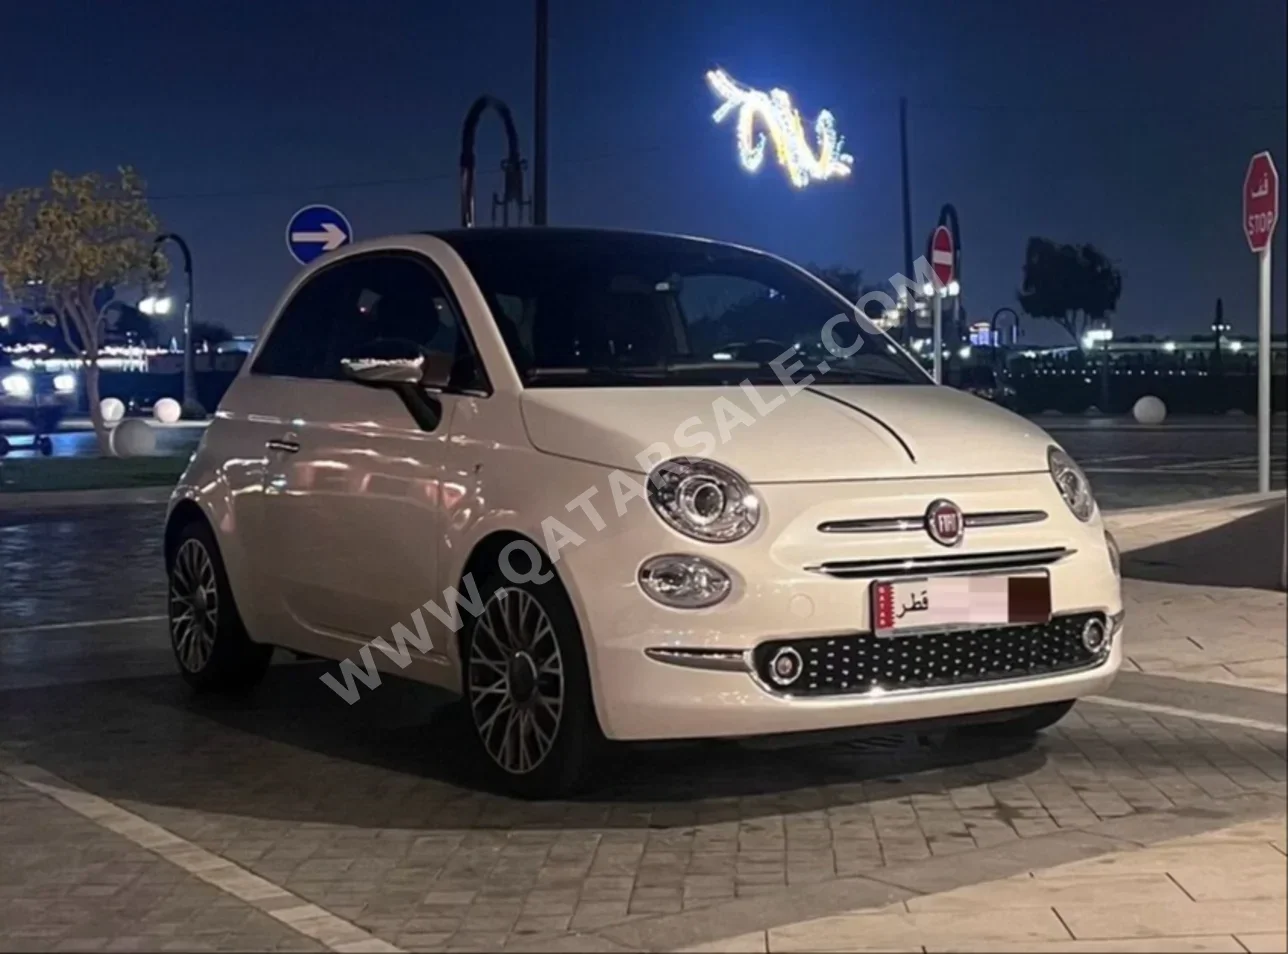 Fiat  500  2021  Automatic  38,000 Km  4 Cylinder  Front Wheel Drive (FWD)  Hatchback  Pearl